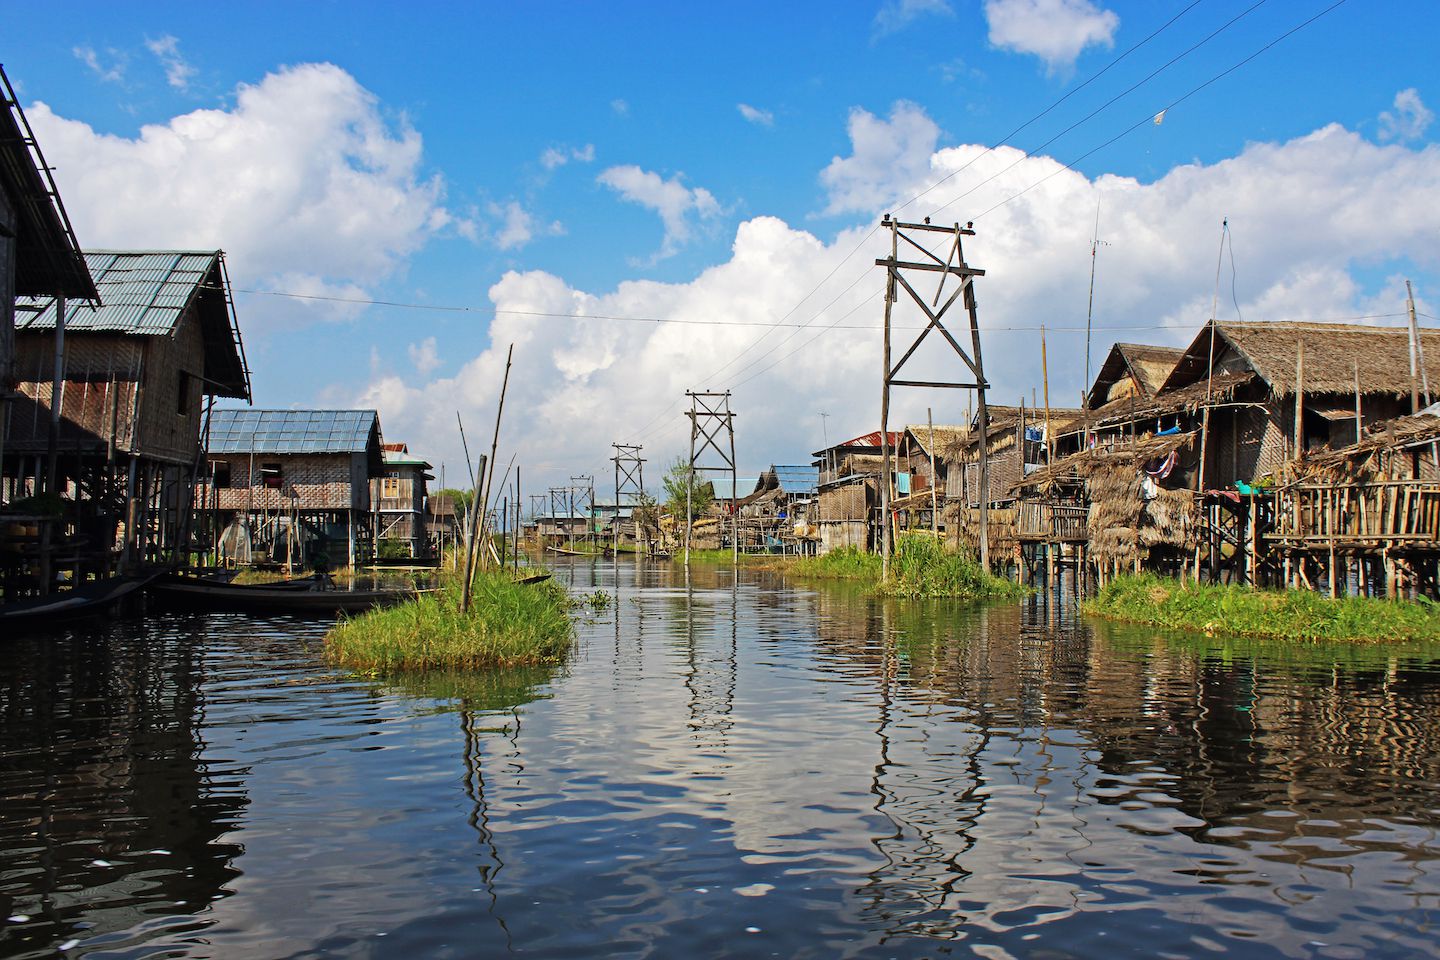 Electric distribution lines at the floating villages, Inle Lake, Myanmar